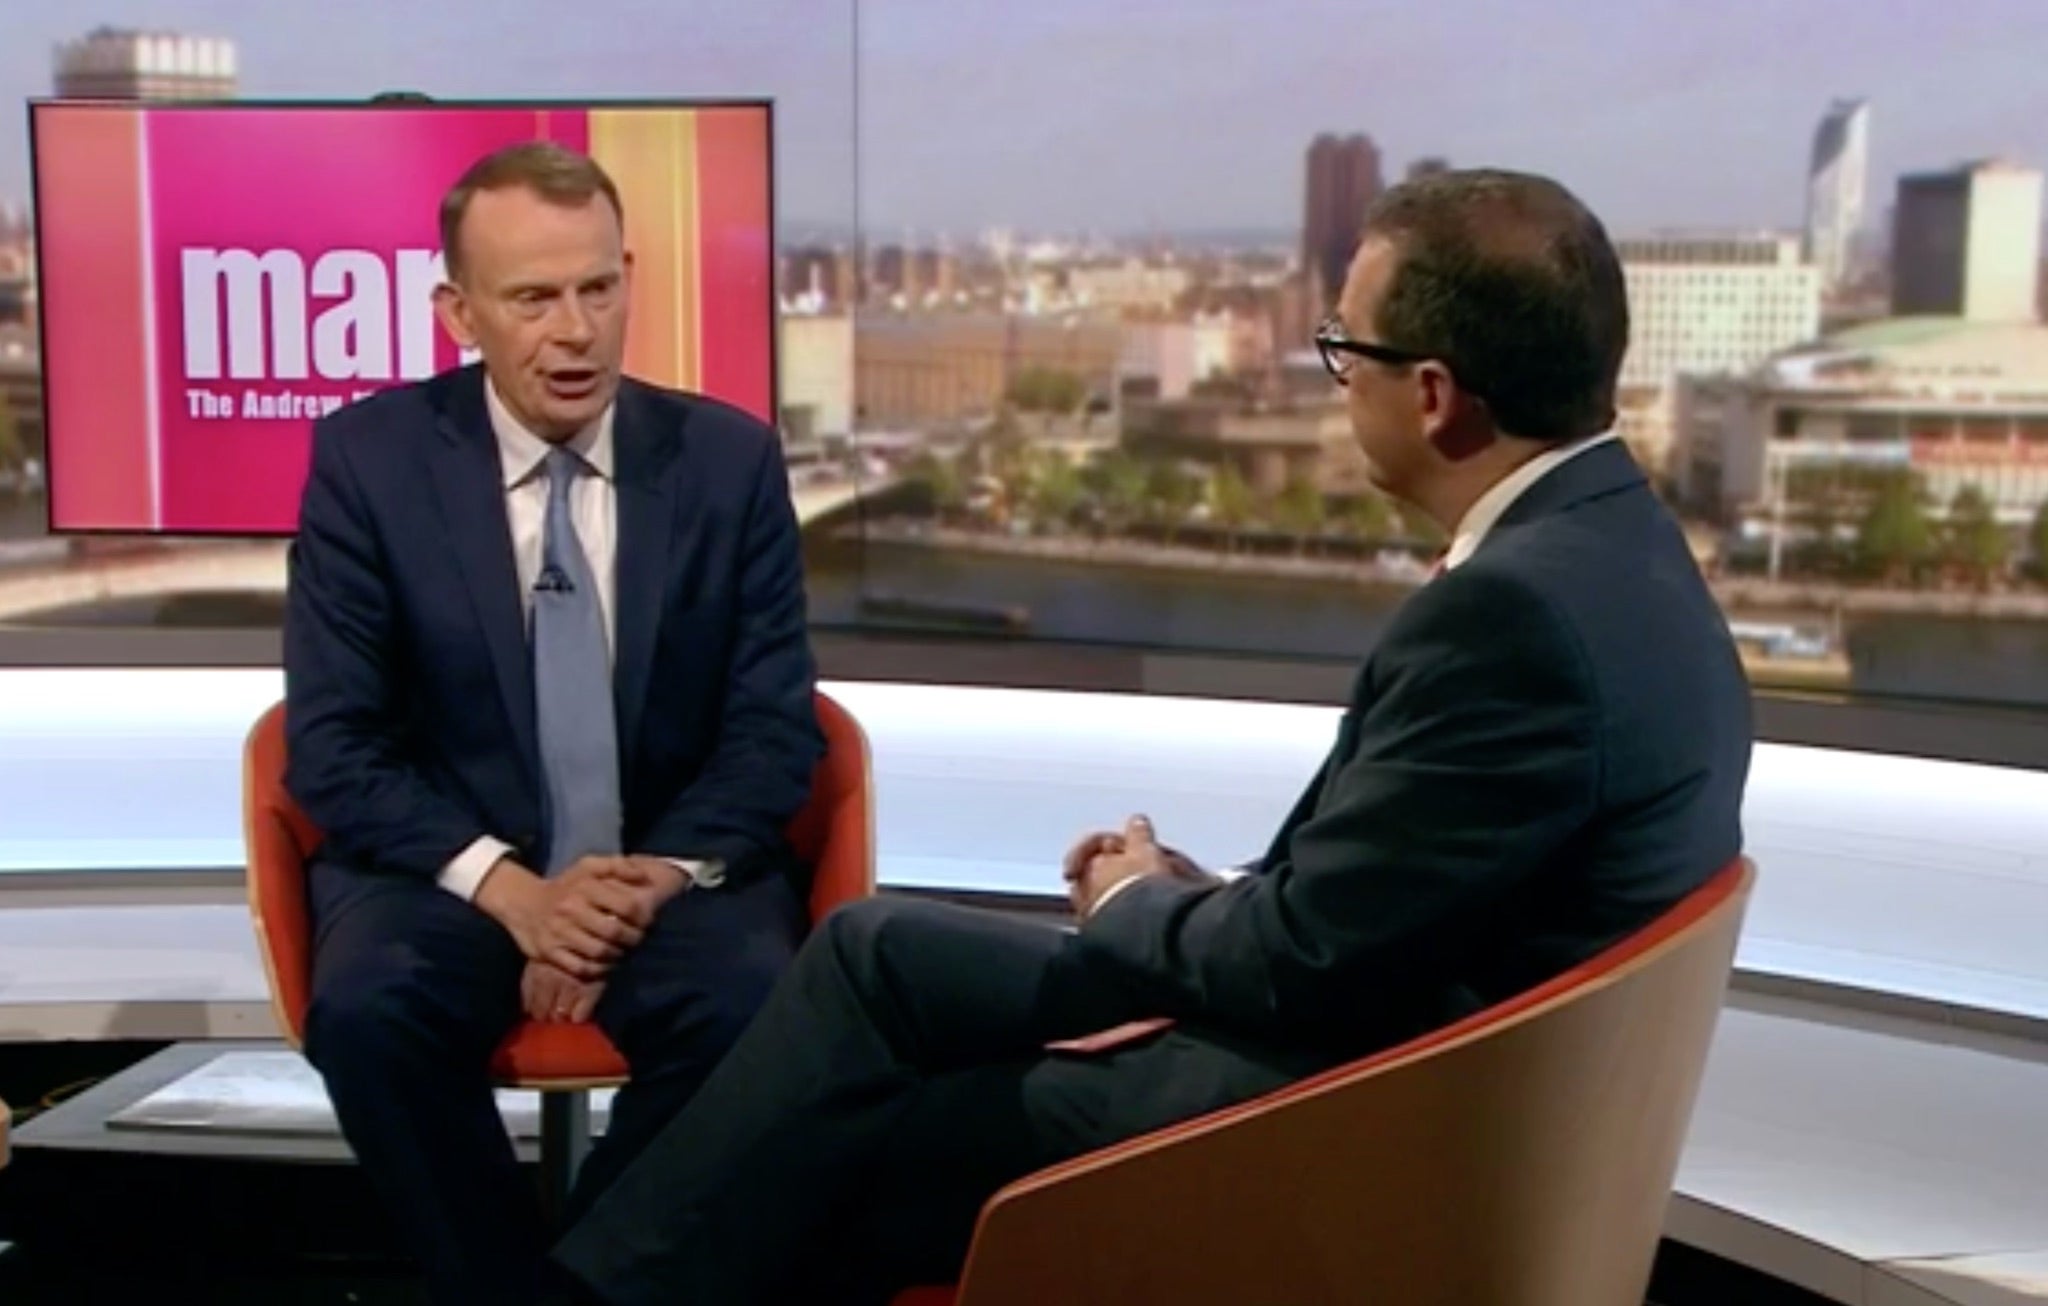 Owen Smith (right) assured Andrew Marr (left) that the he has a 10/10 chance to oust Jeremy Corbyn